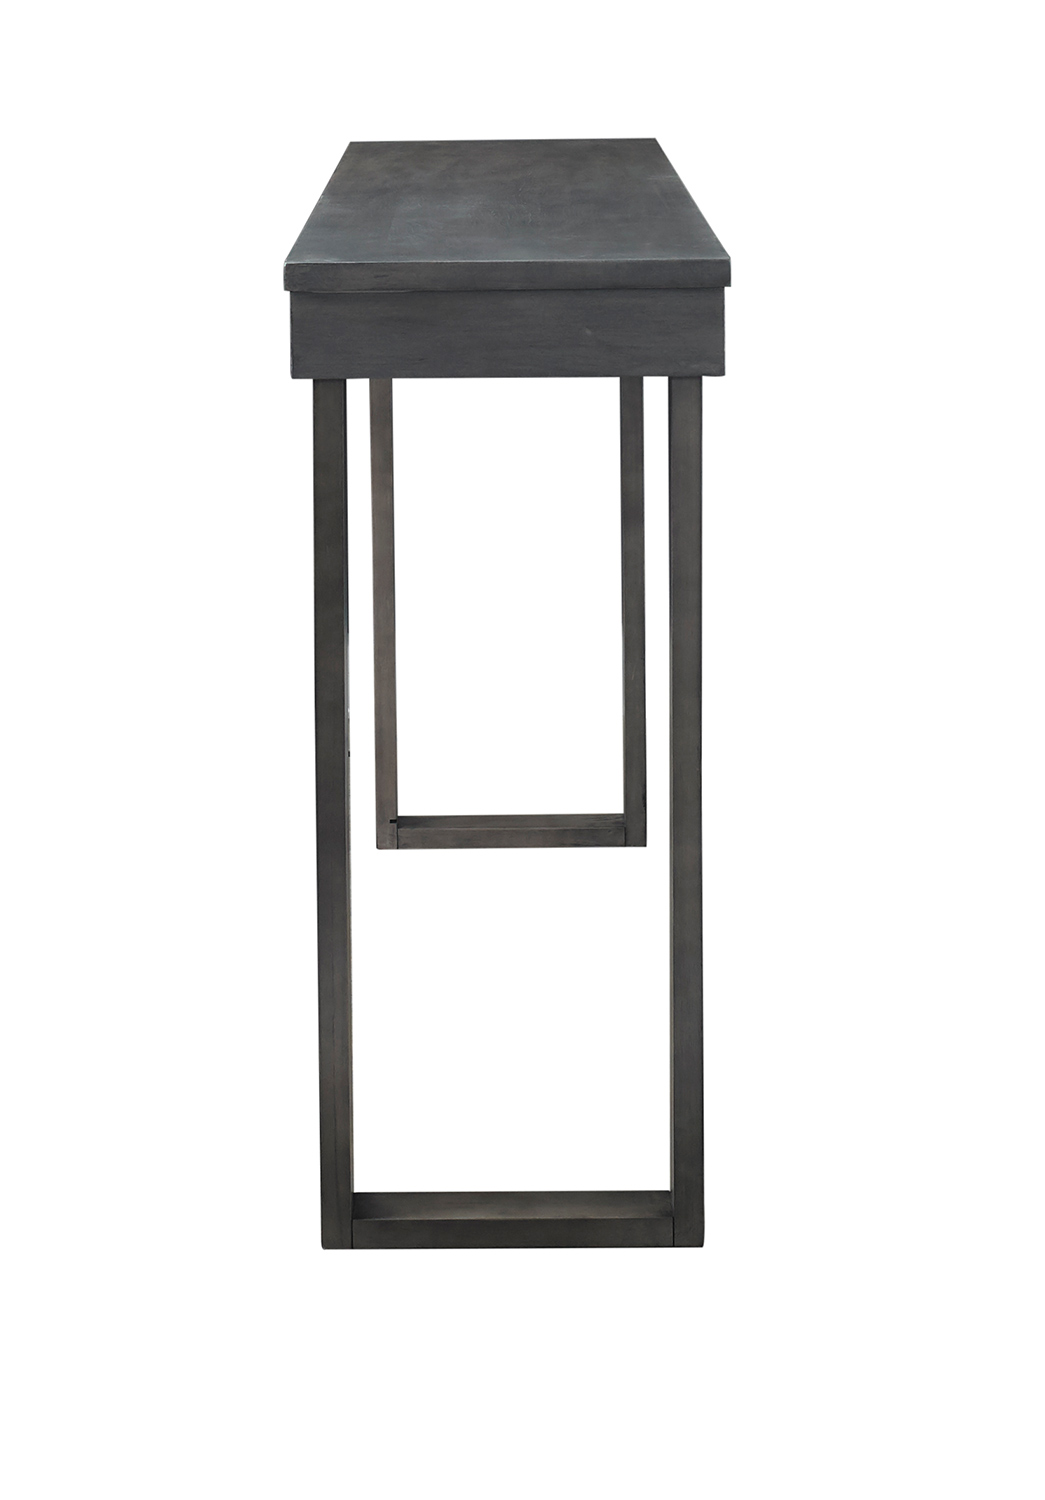 Powell Kyler Dining Console Table - Grey